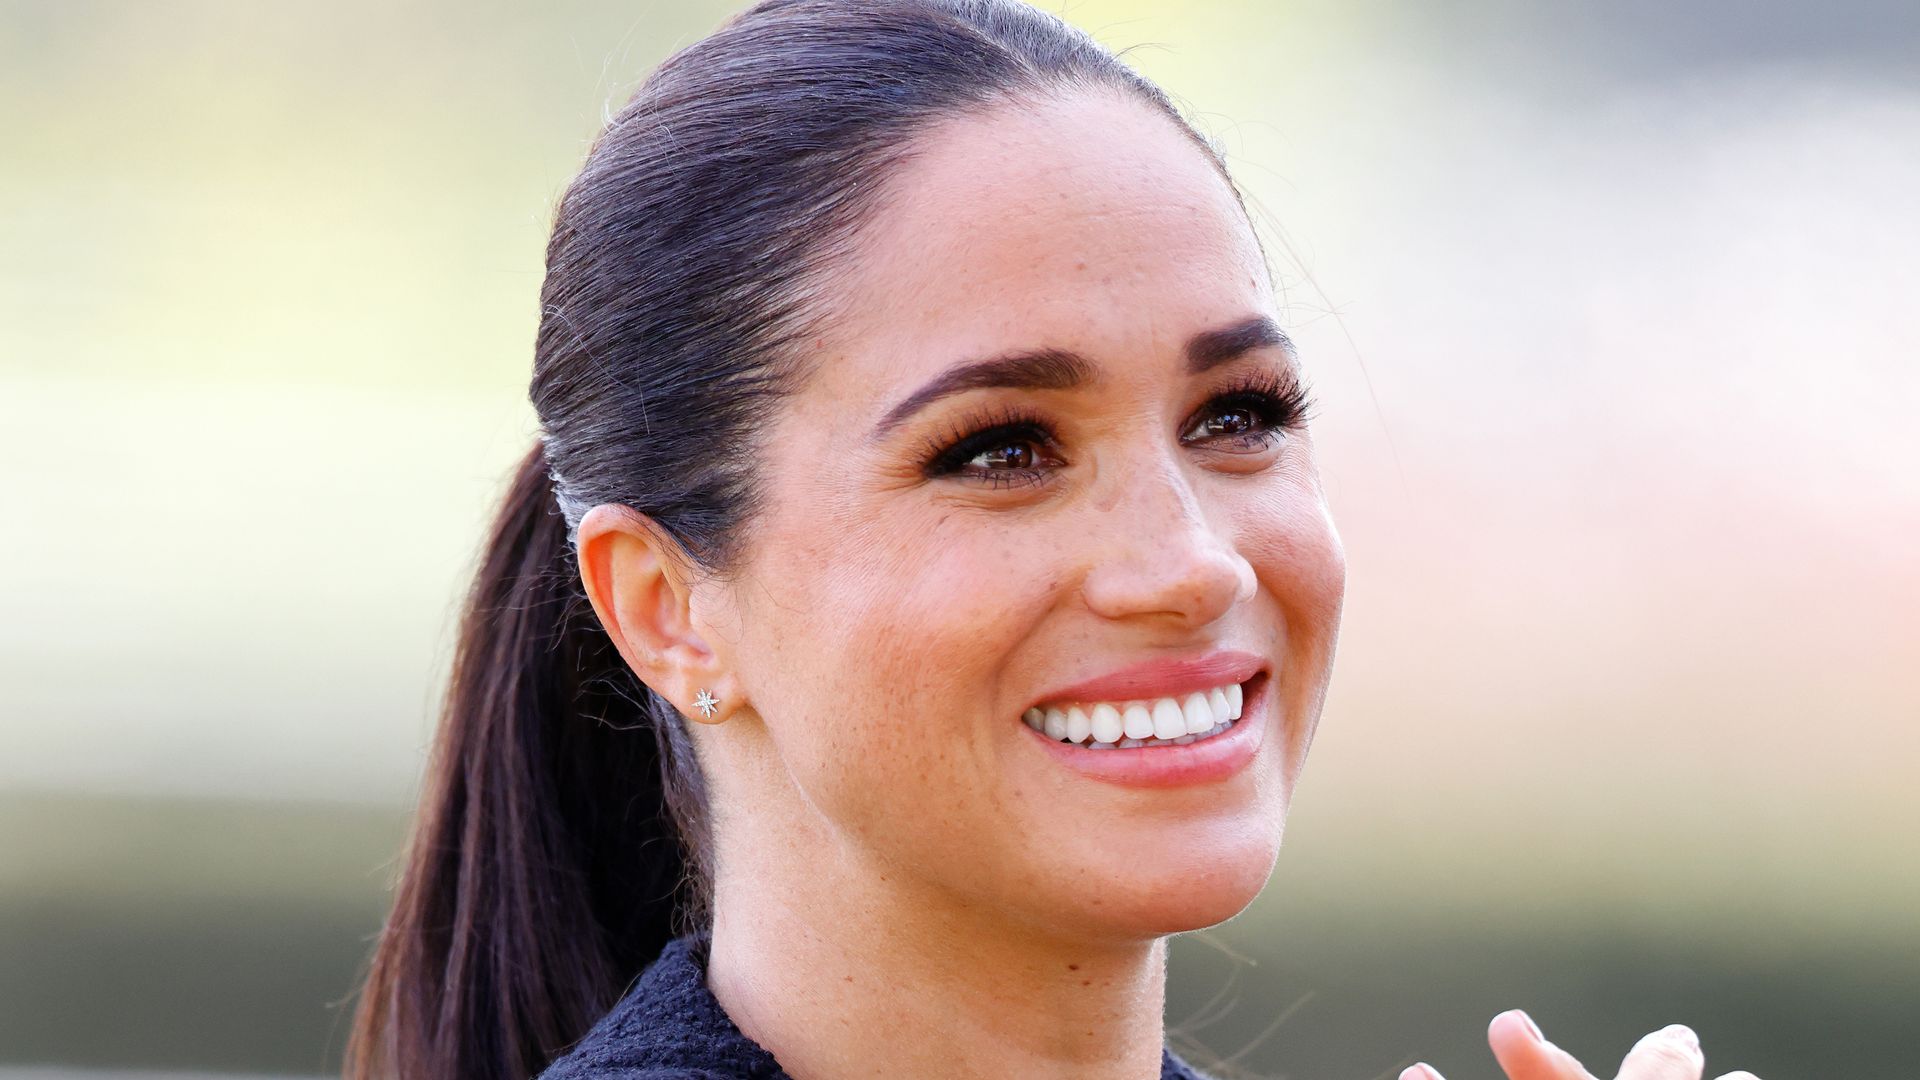 Meghan Markle wearing Serena Williams earrings at the Invictus Games